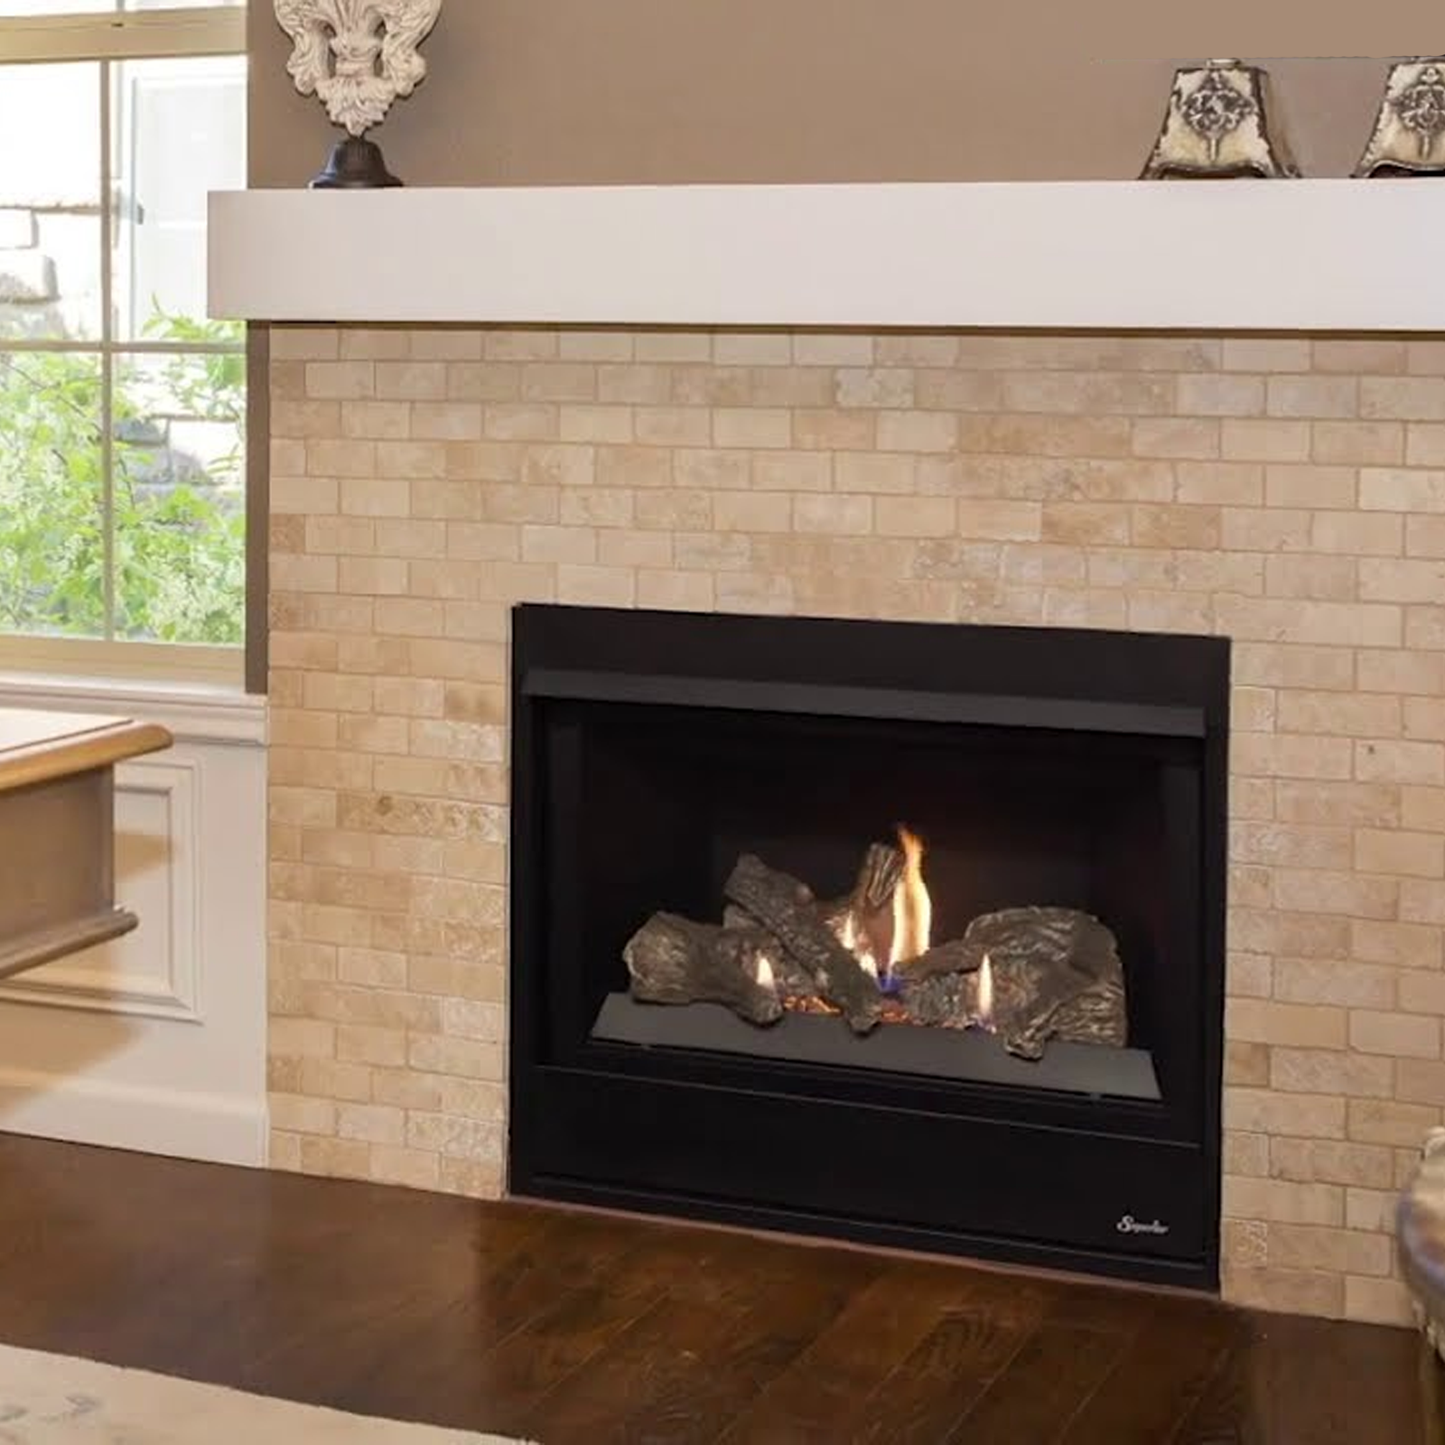 Superior DRC 2033 Direct Vent Gas Fireplace